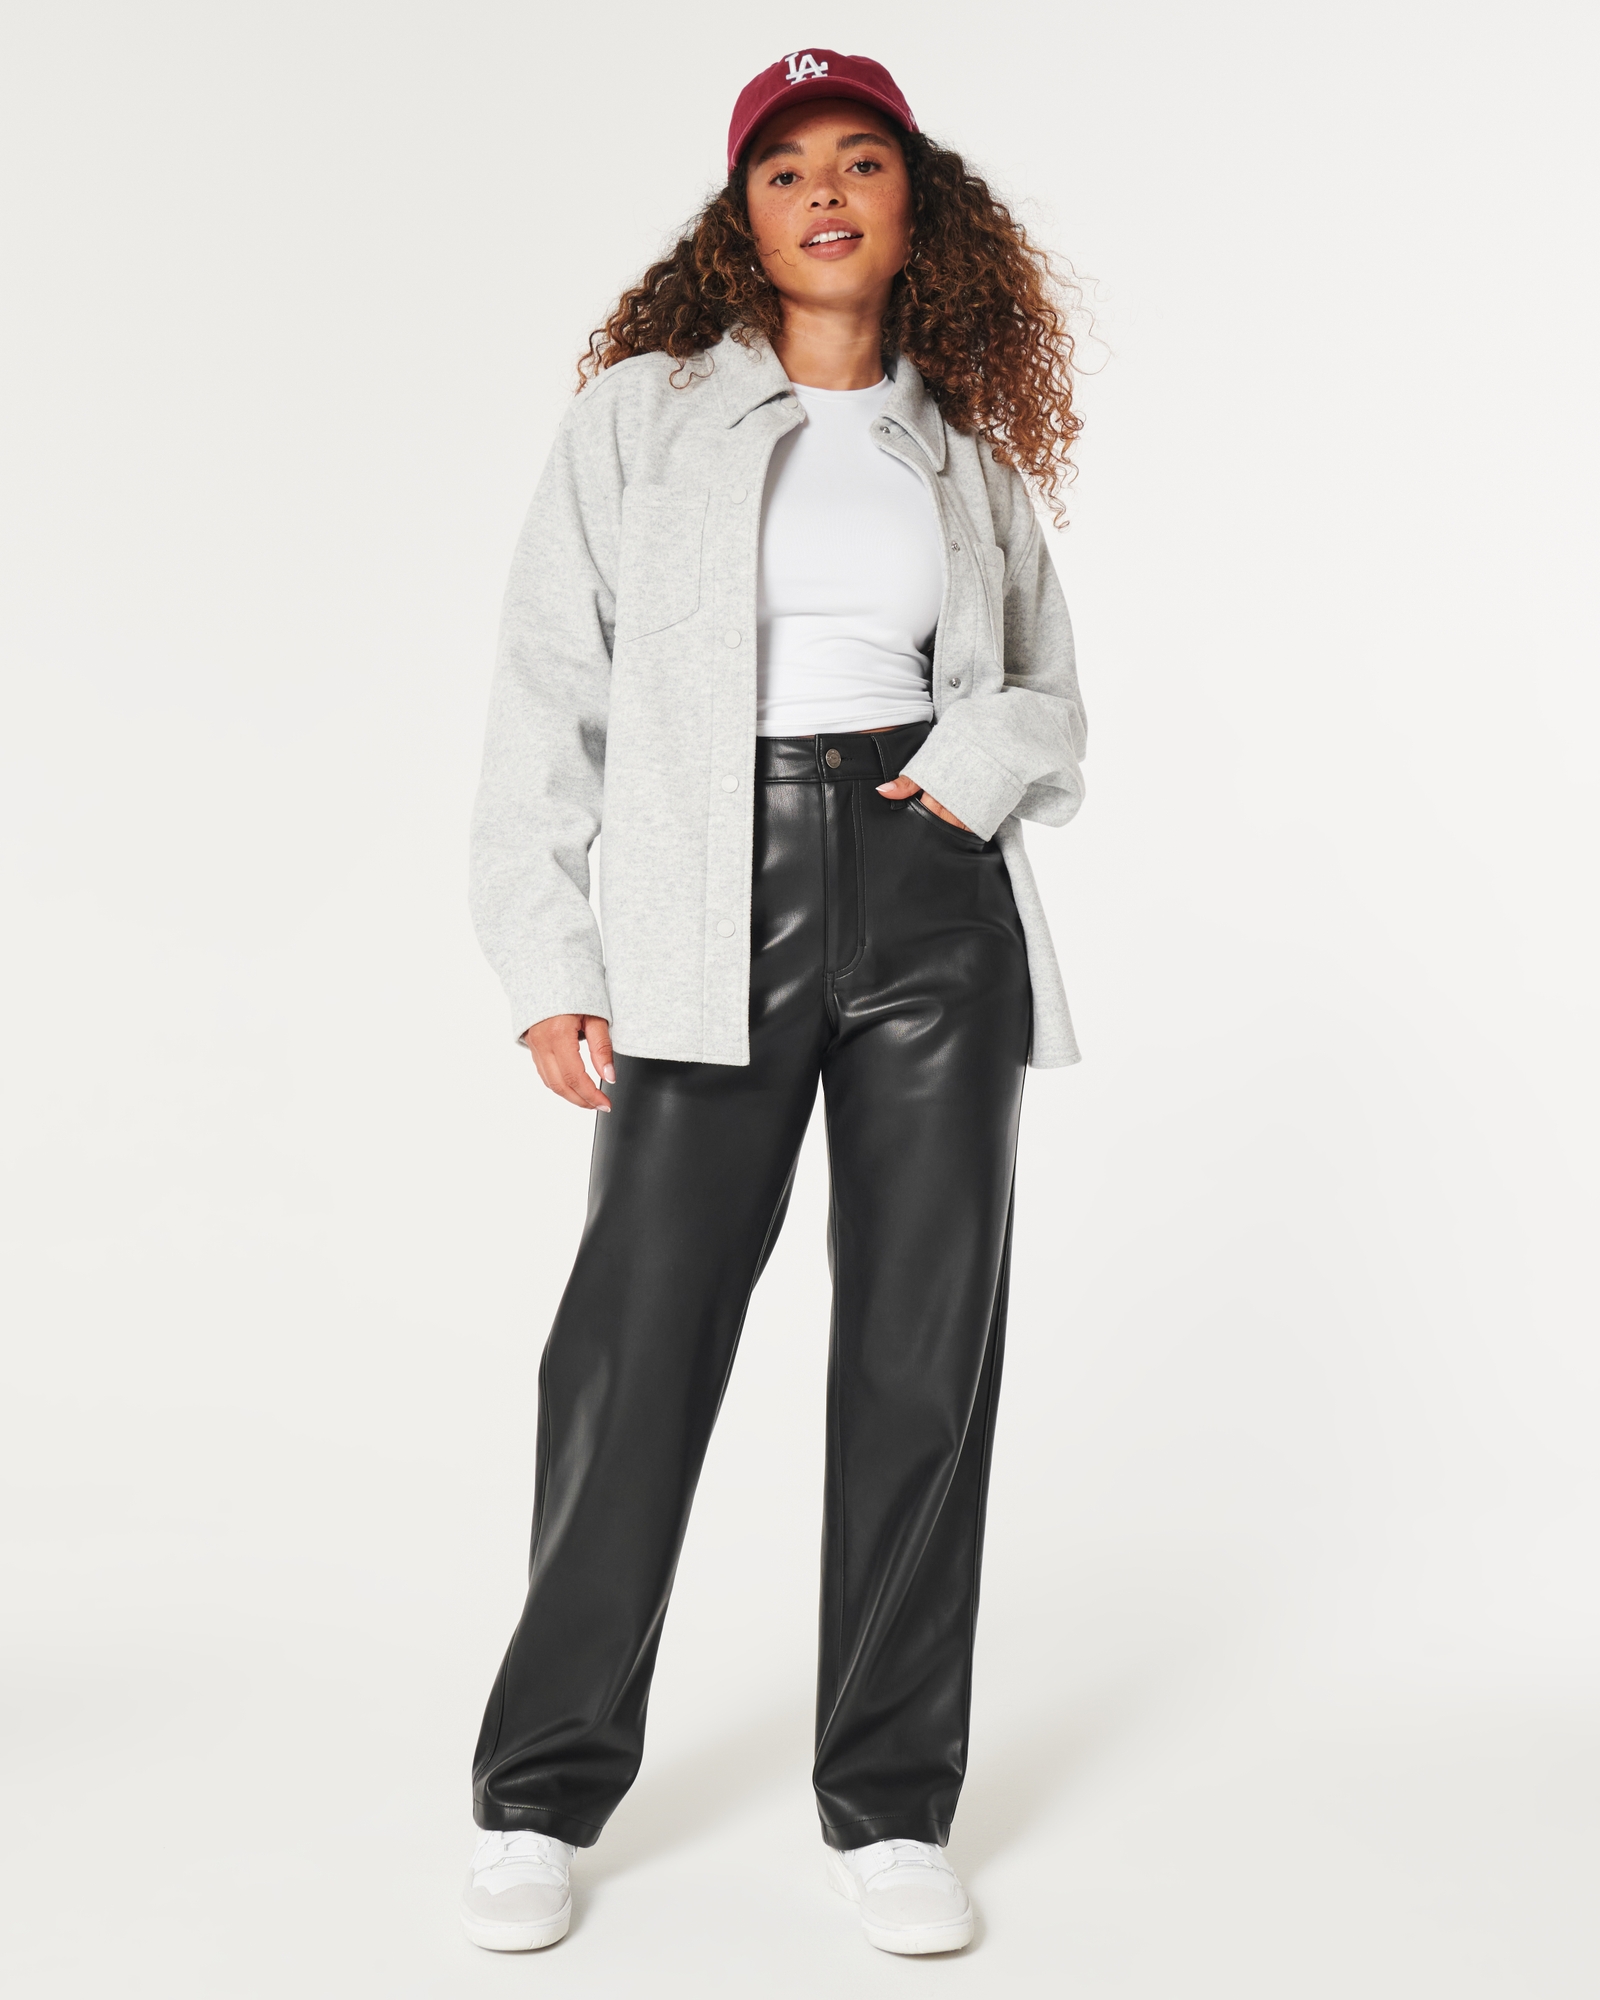 Hollister Co. ULTRA HIGH-RISE VEGAN LEATHER FLARE PANTS - Leather trousers  - BLACK/black 